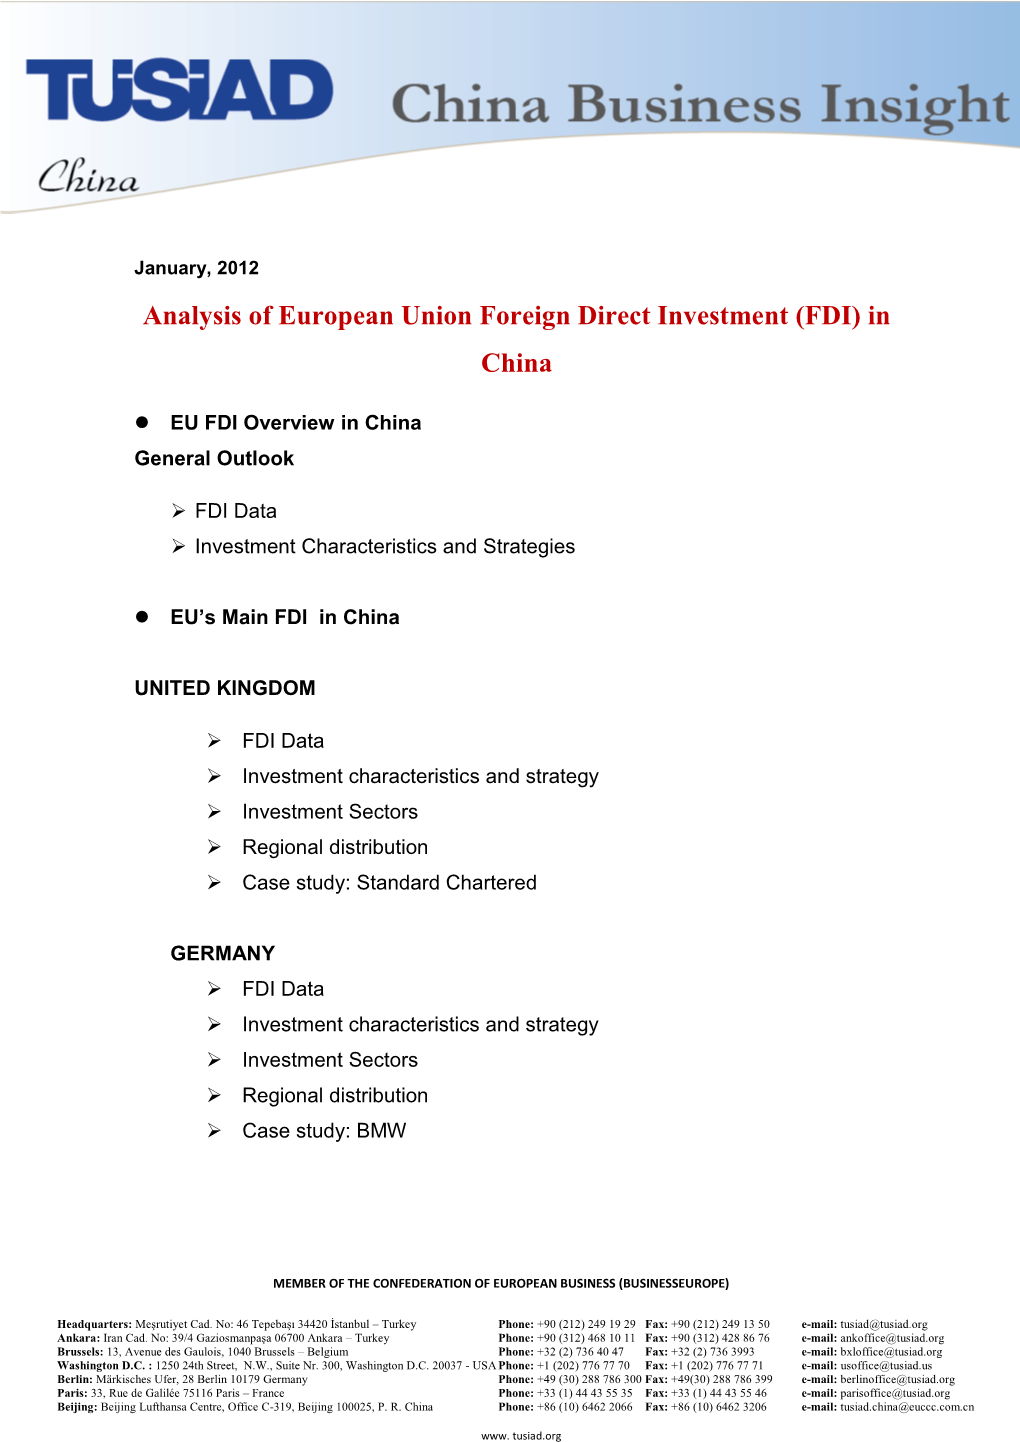 Analysis of European Union Foreign Direct Investment (FDI) in China